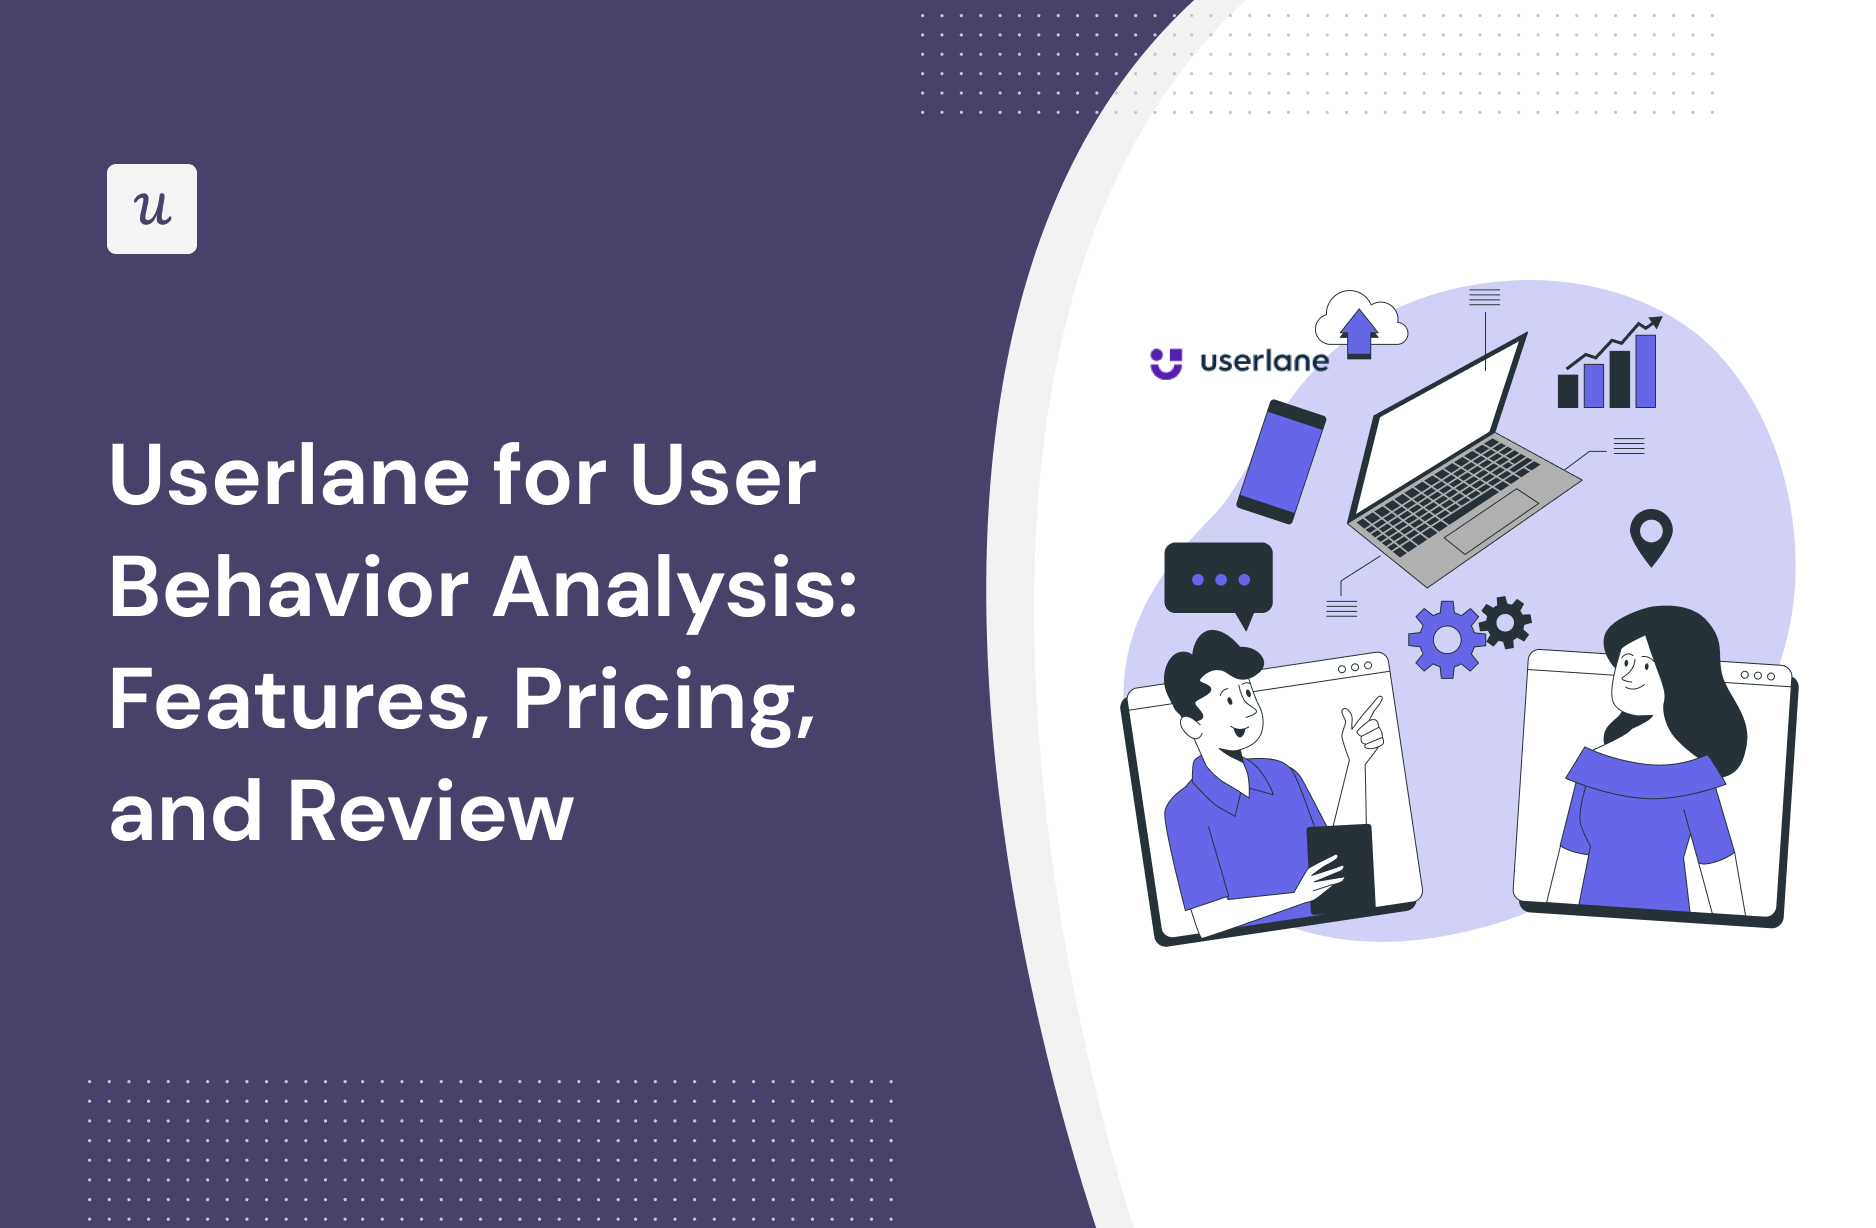 Userlane for User Behavior Analysis: Features, Pricing, and Review